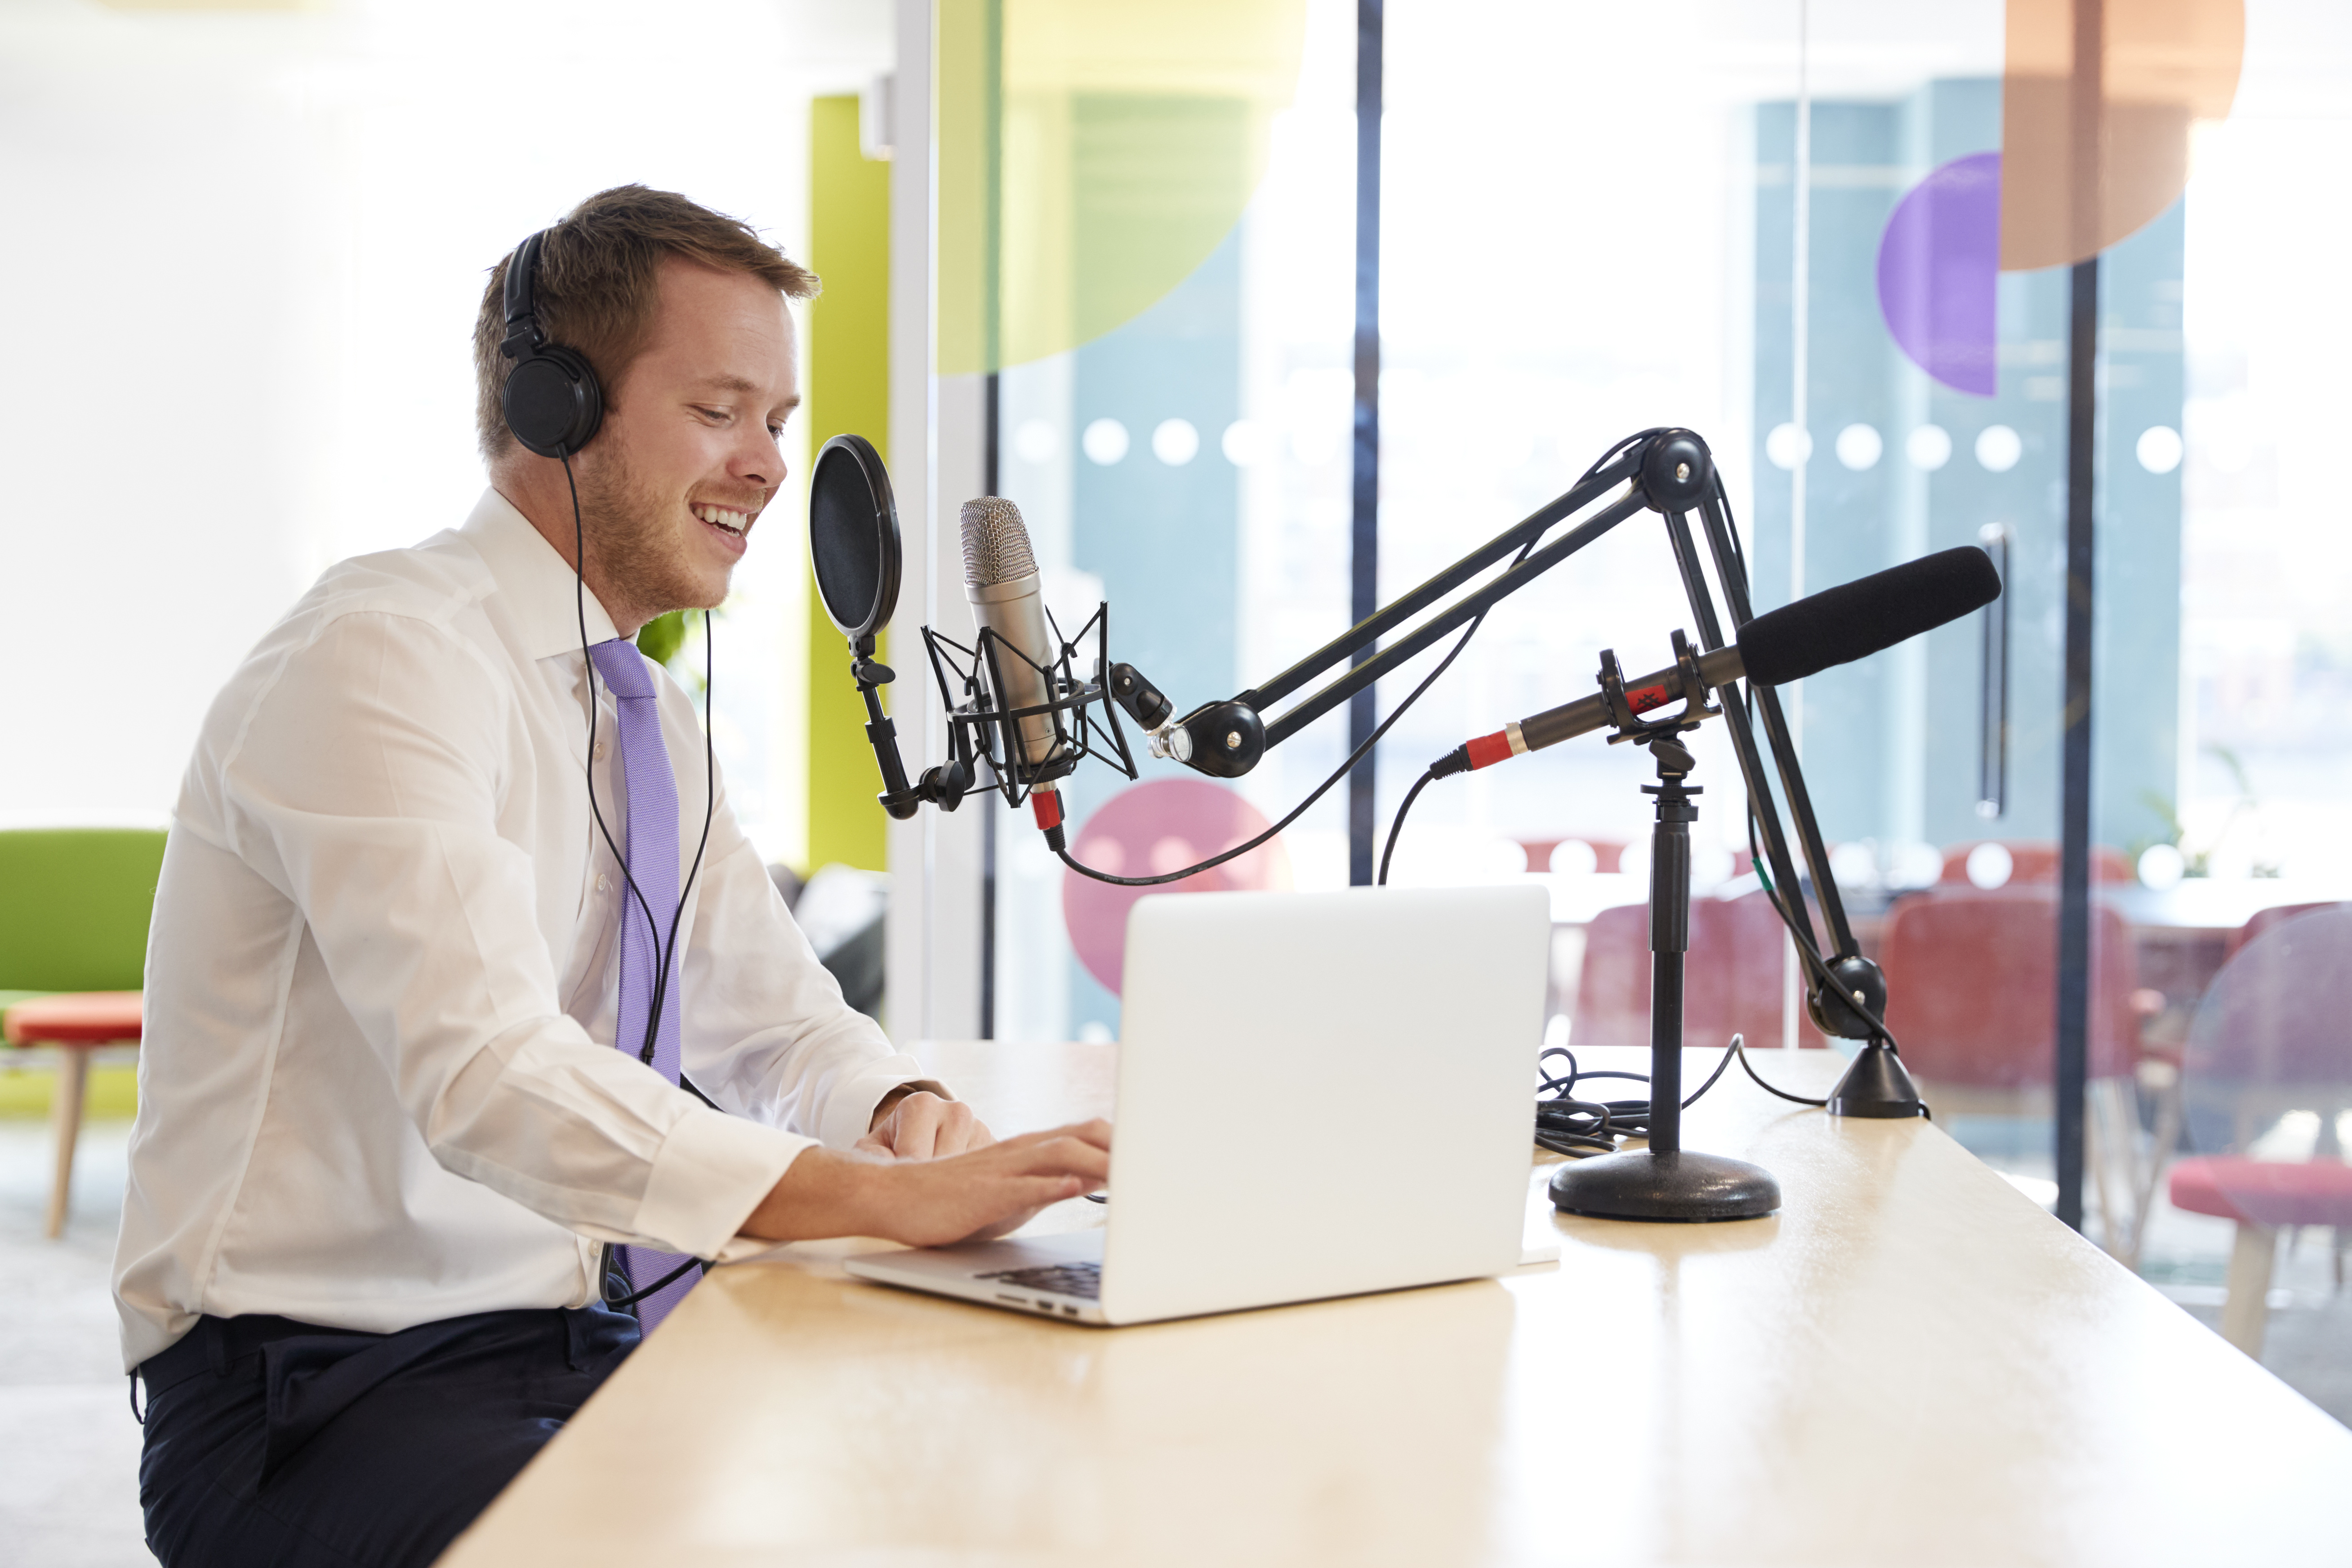 Podcasts: An Untapped Opportunity for Financial Advisors